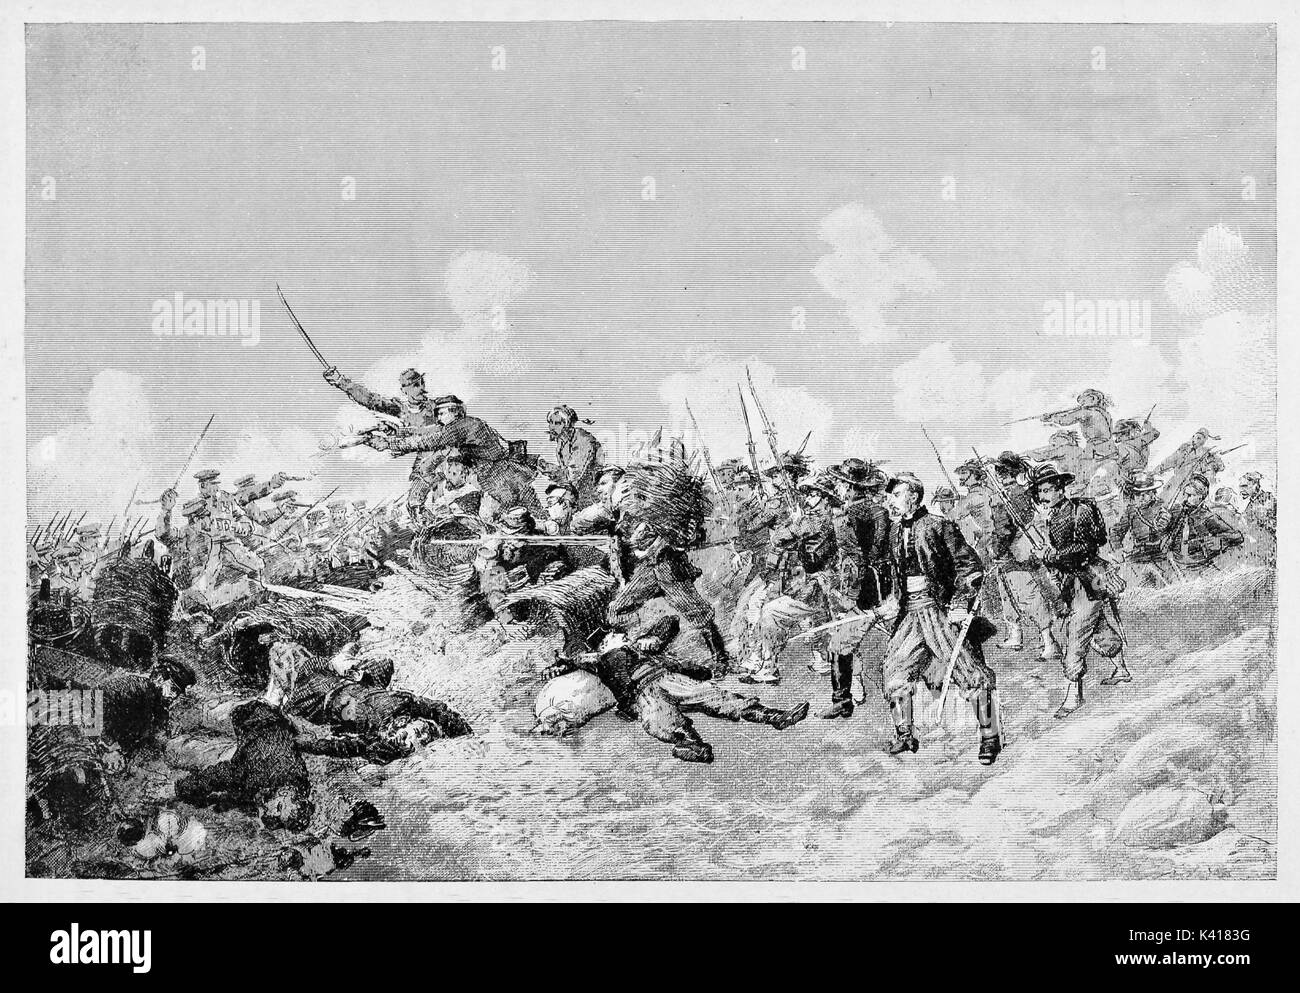 Ancient soldiers fighting on battlefield using swords and bayonets. Battle of Malakoff during Crimean war 1855. By E. Matania published on Garibaldi e i Suoi Tempi Milan Italy 1884 Stock Photo